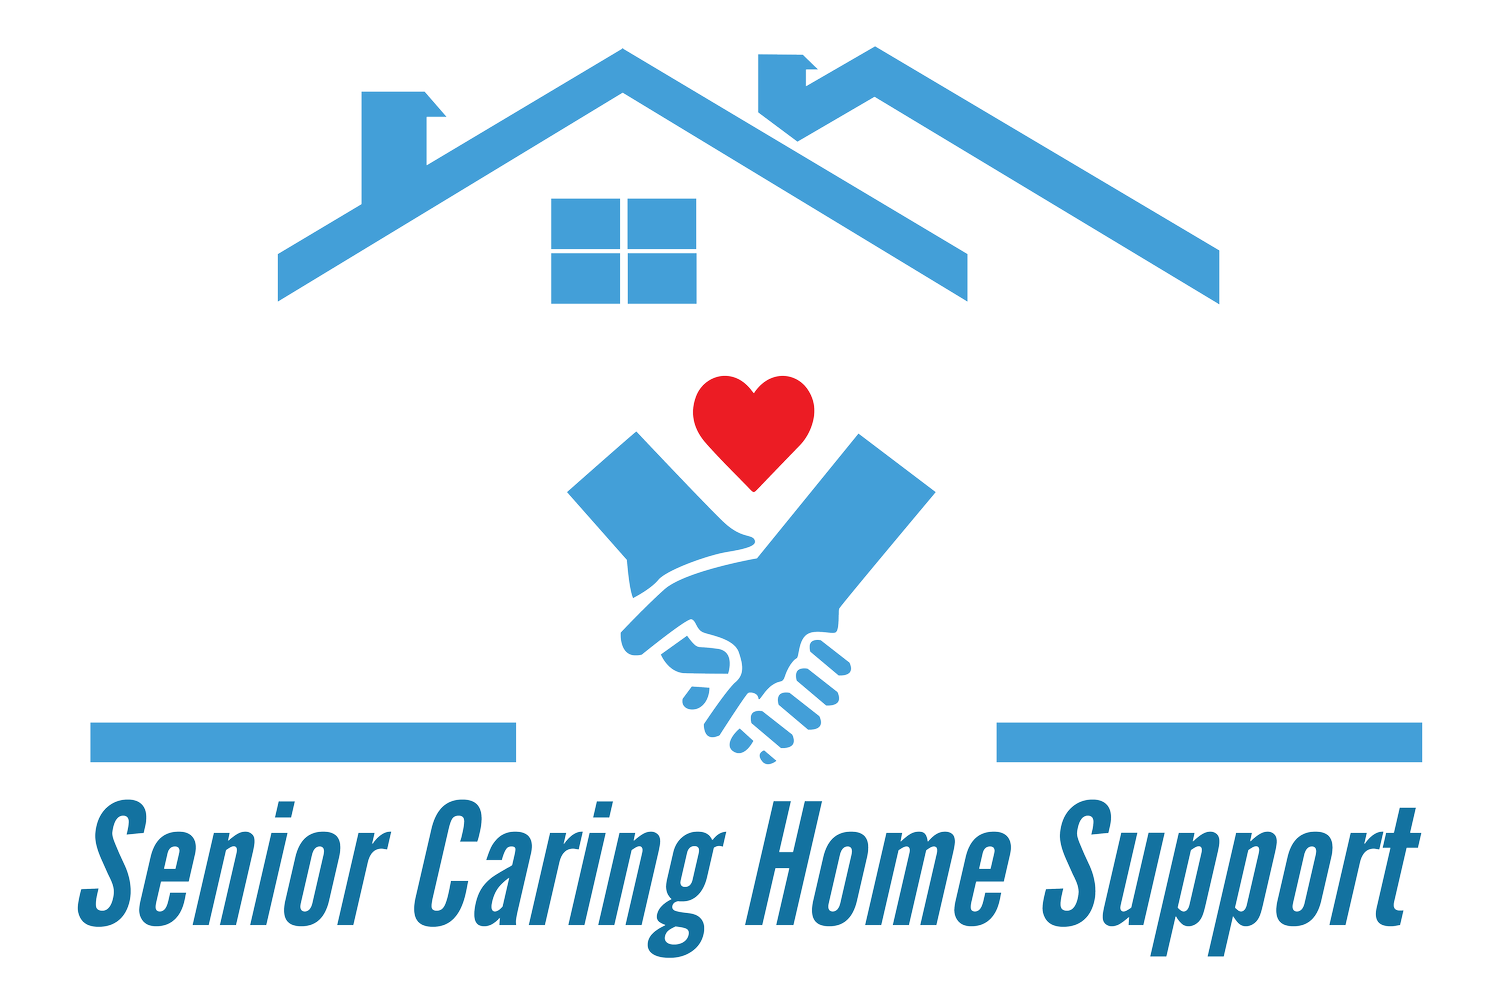 Senior Caring Home Support